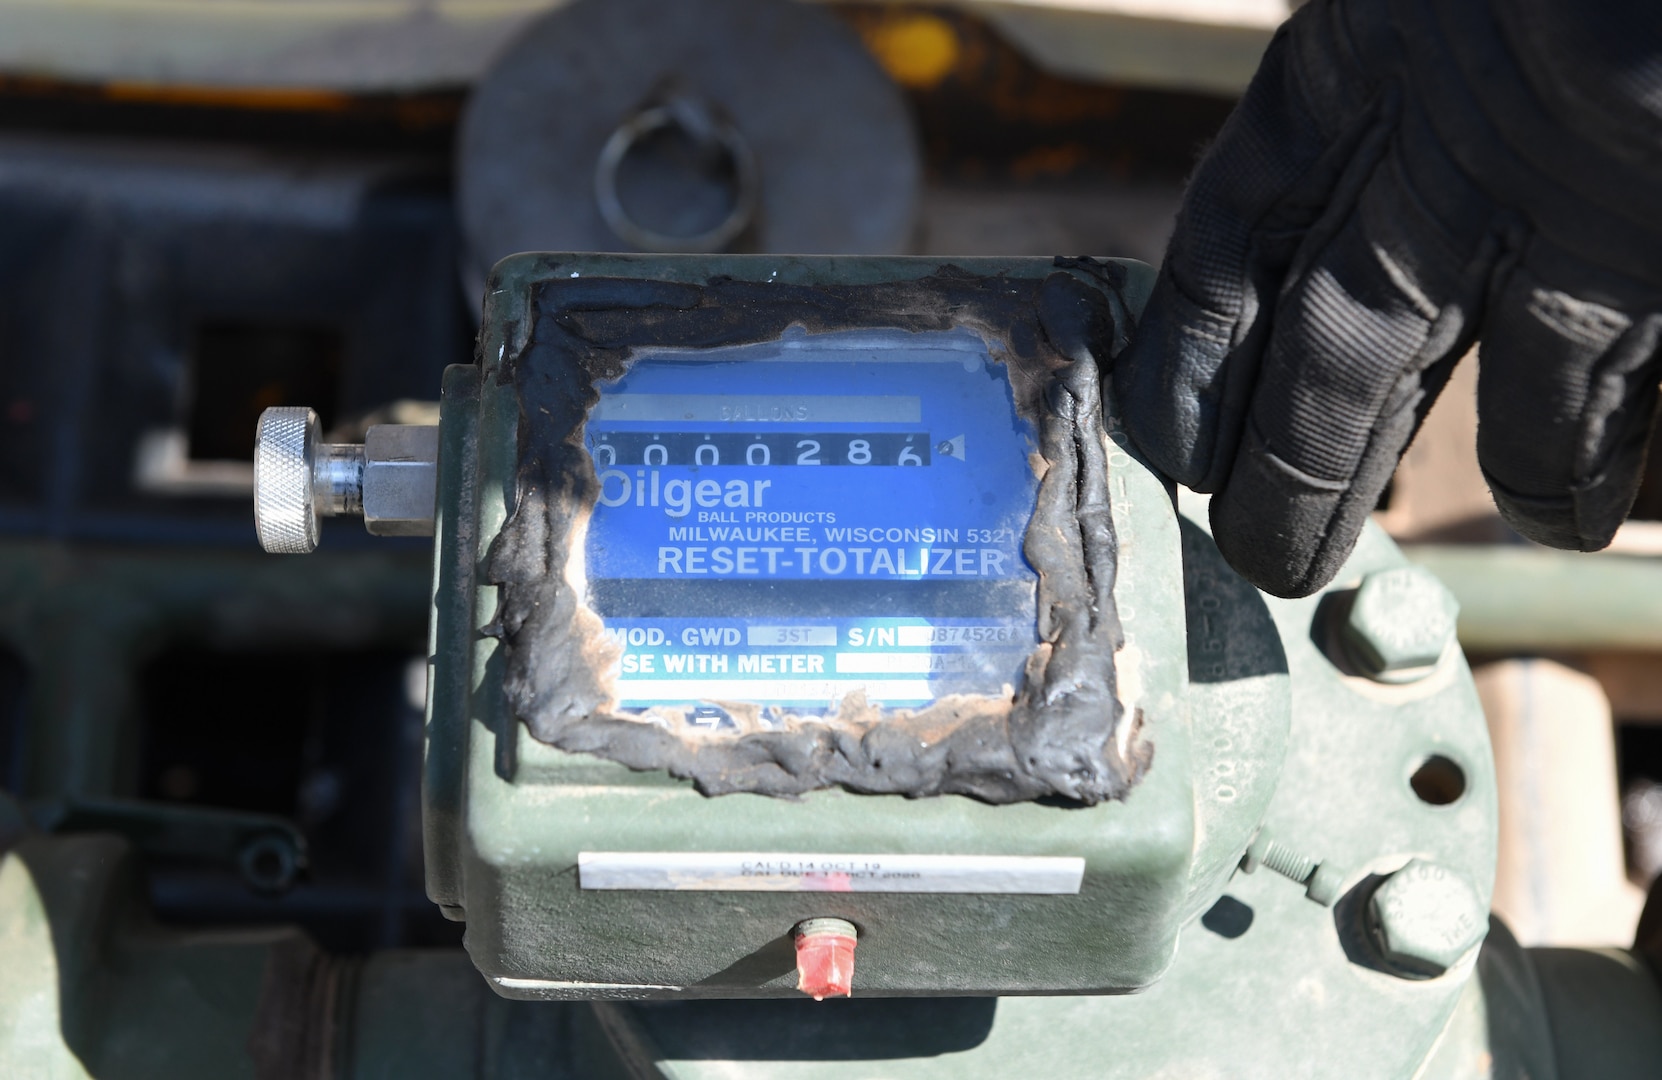 U.S. Air Force Master Sgt. Larry Davidson, 776th Expeditionary Air Base Squadron Fuels superintendent, checks the master meter during the meter calibration of an R11 refueling truck at Chabelley Airfield, Djibouti, Nov. 8, 2019. The master meter is the benchmark used to set the tanker’s onboard meter ensuring the proper amount of fuel is flowing during calibration. (U.S. Air Force photo by Staff Sgt. Alex Fox Echols III)